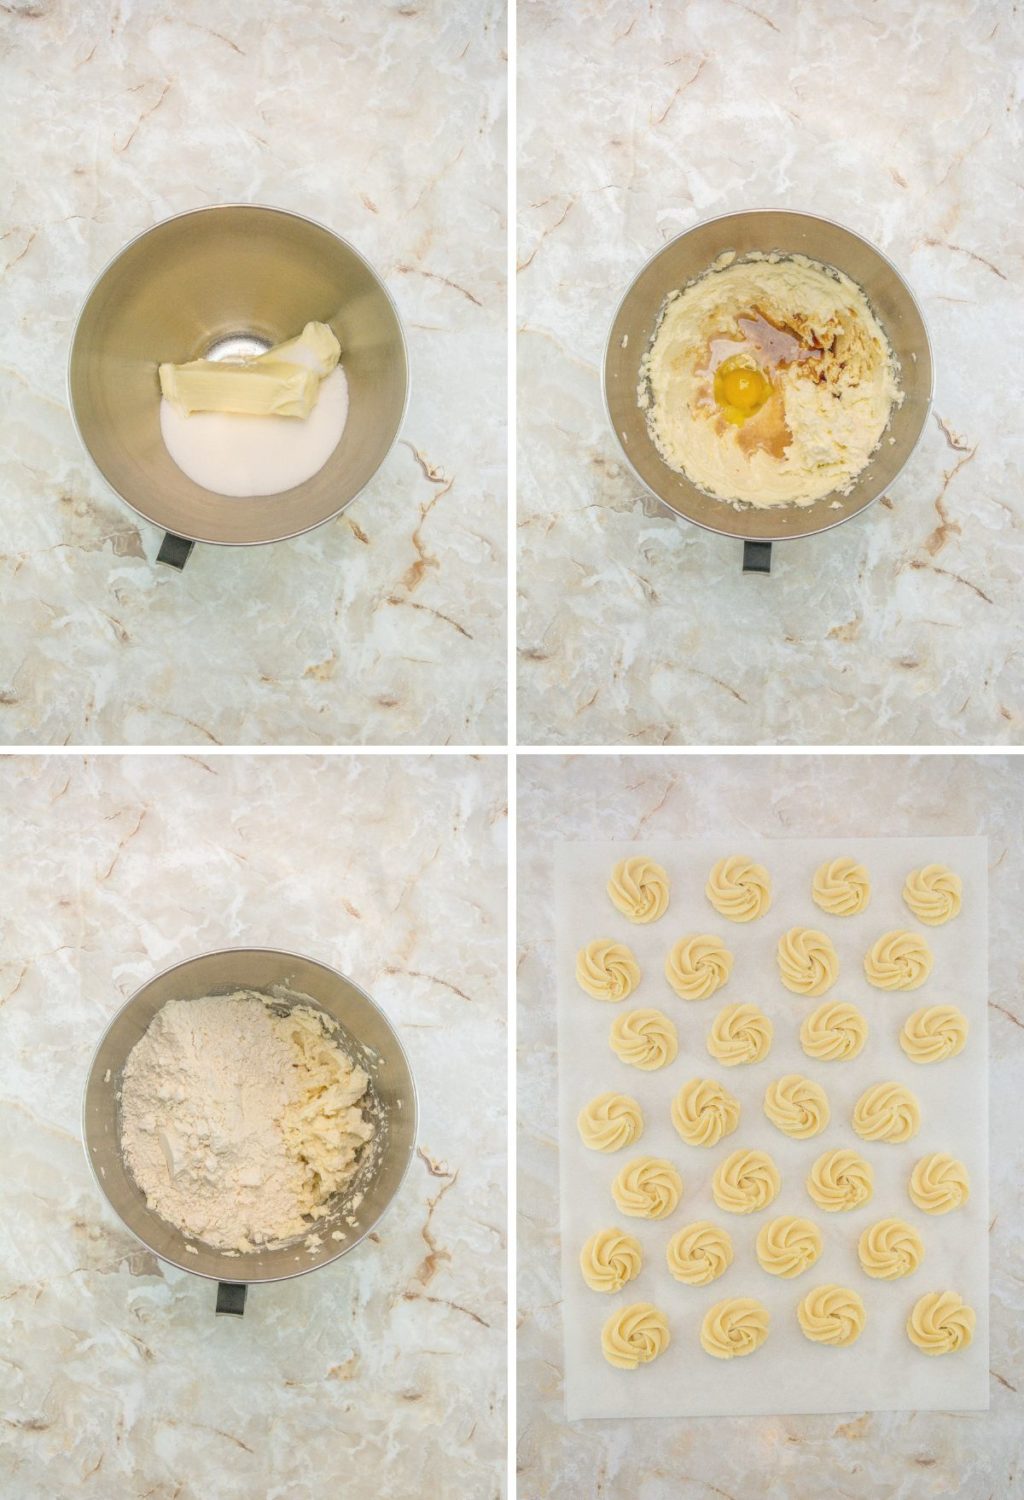 A series of photos showing the process of making cookies.